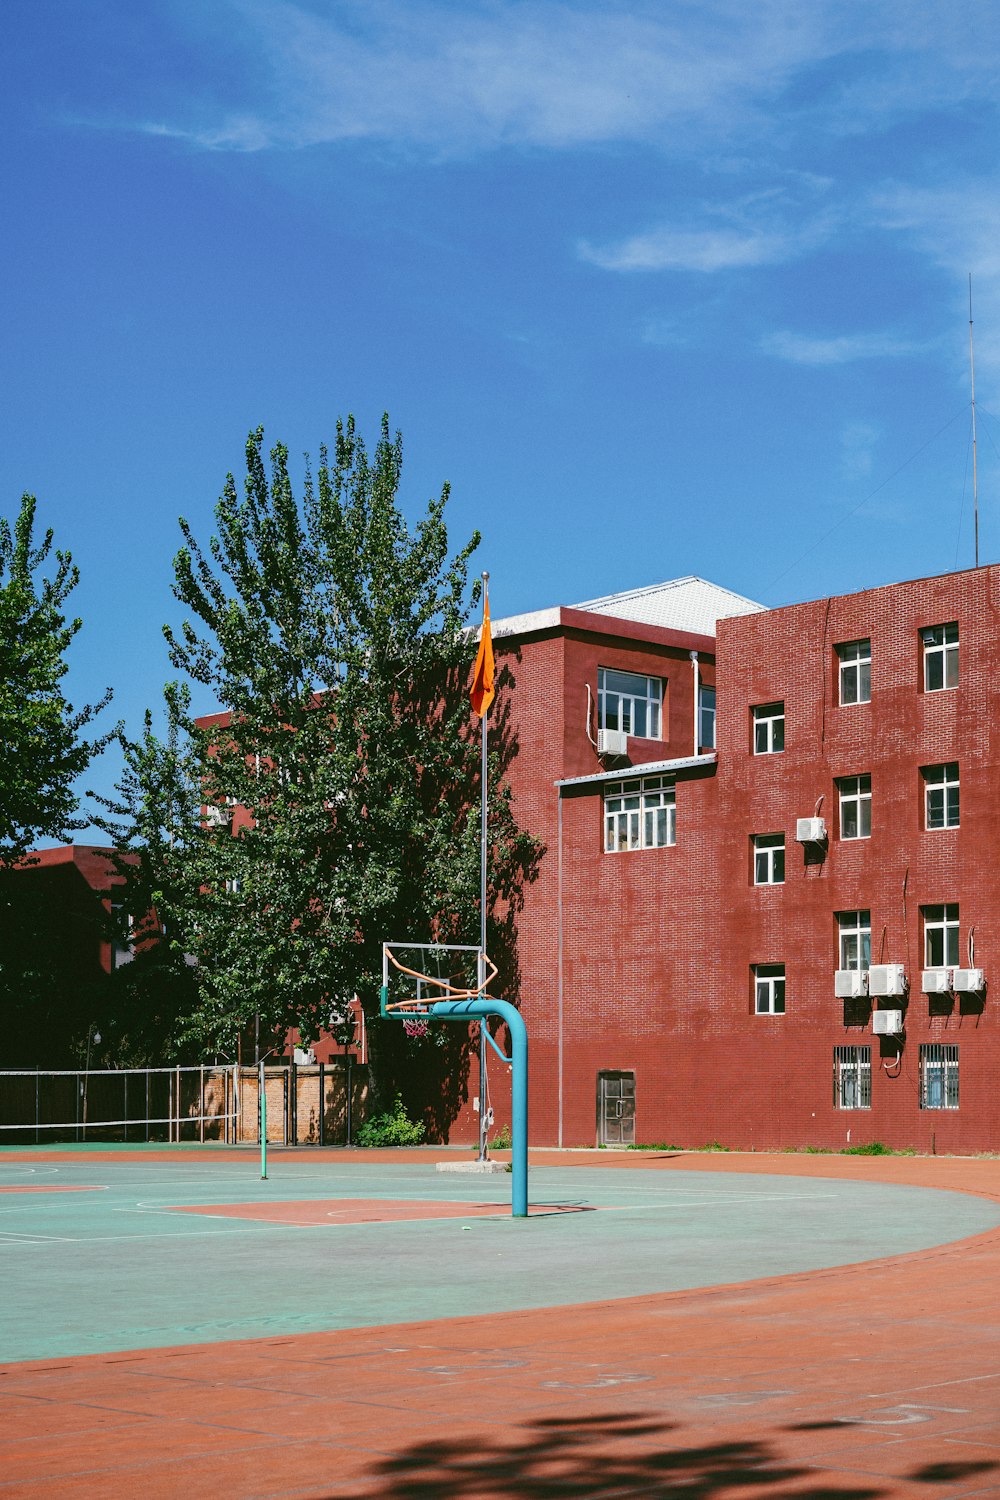 a basketball court in front of a red building